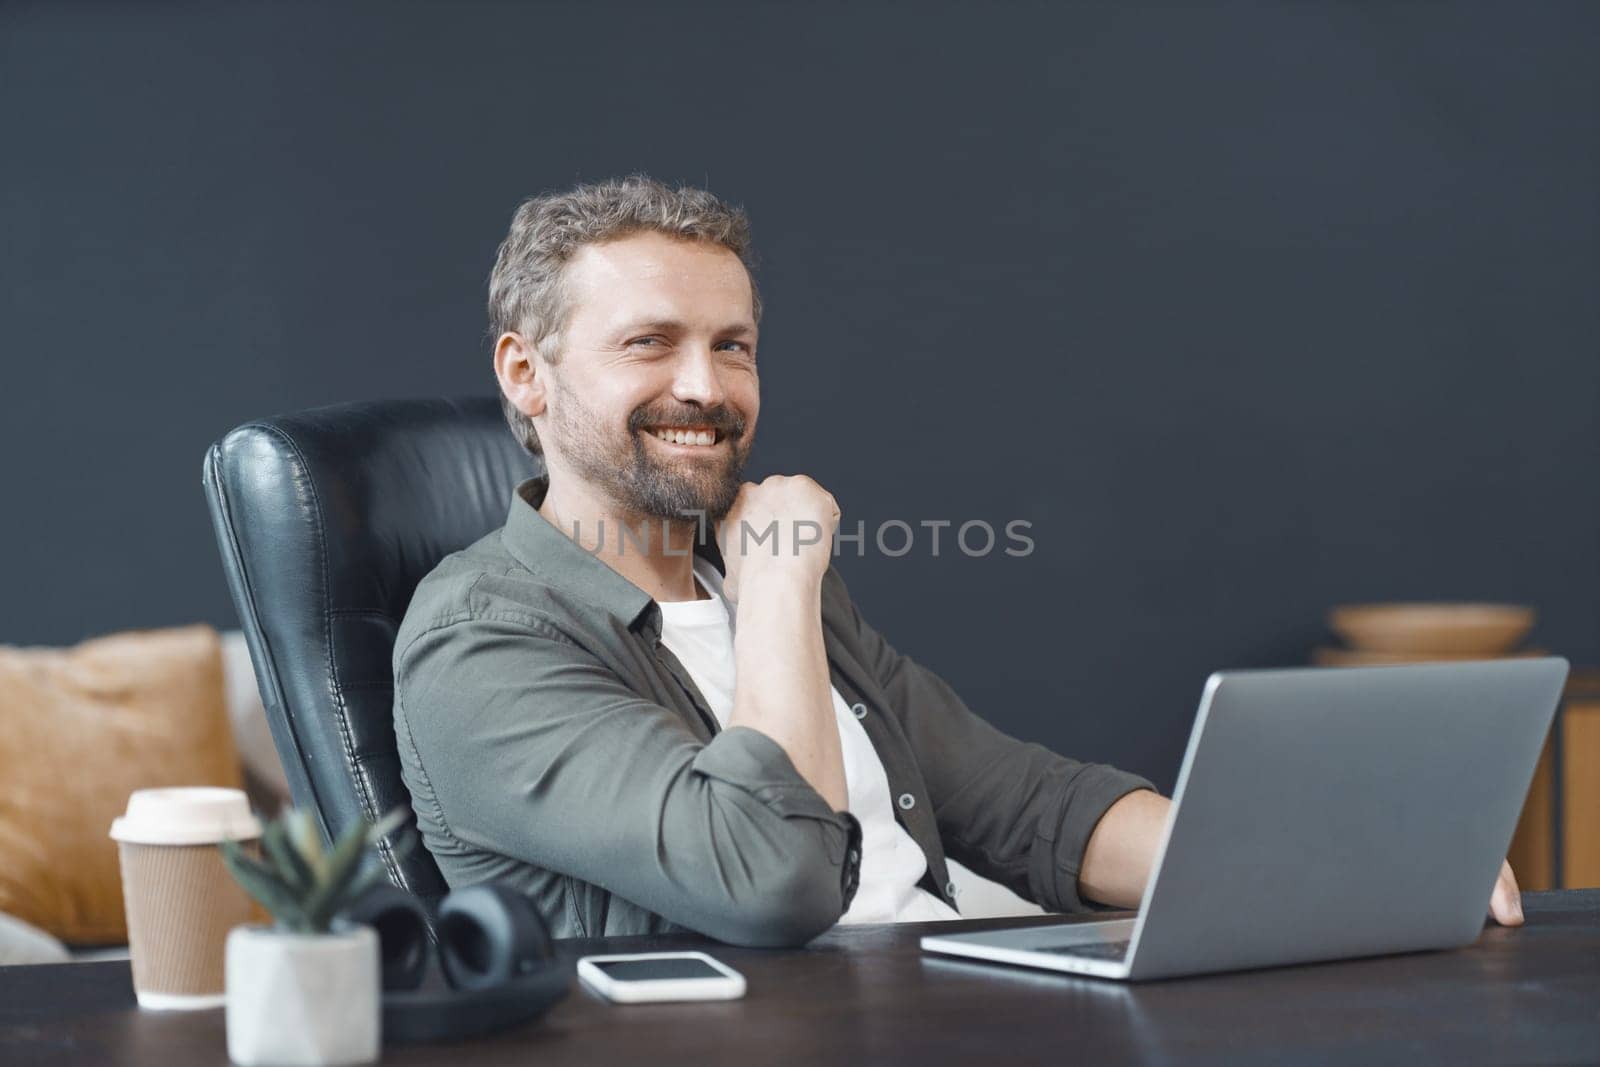 Smiling man finds joy in work as he diligently operates laptop on well-organized desk within bustling office environment. Corporate world, where he excels in his career with sense of fulfillment. by LipikStockMedia